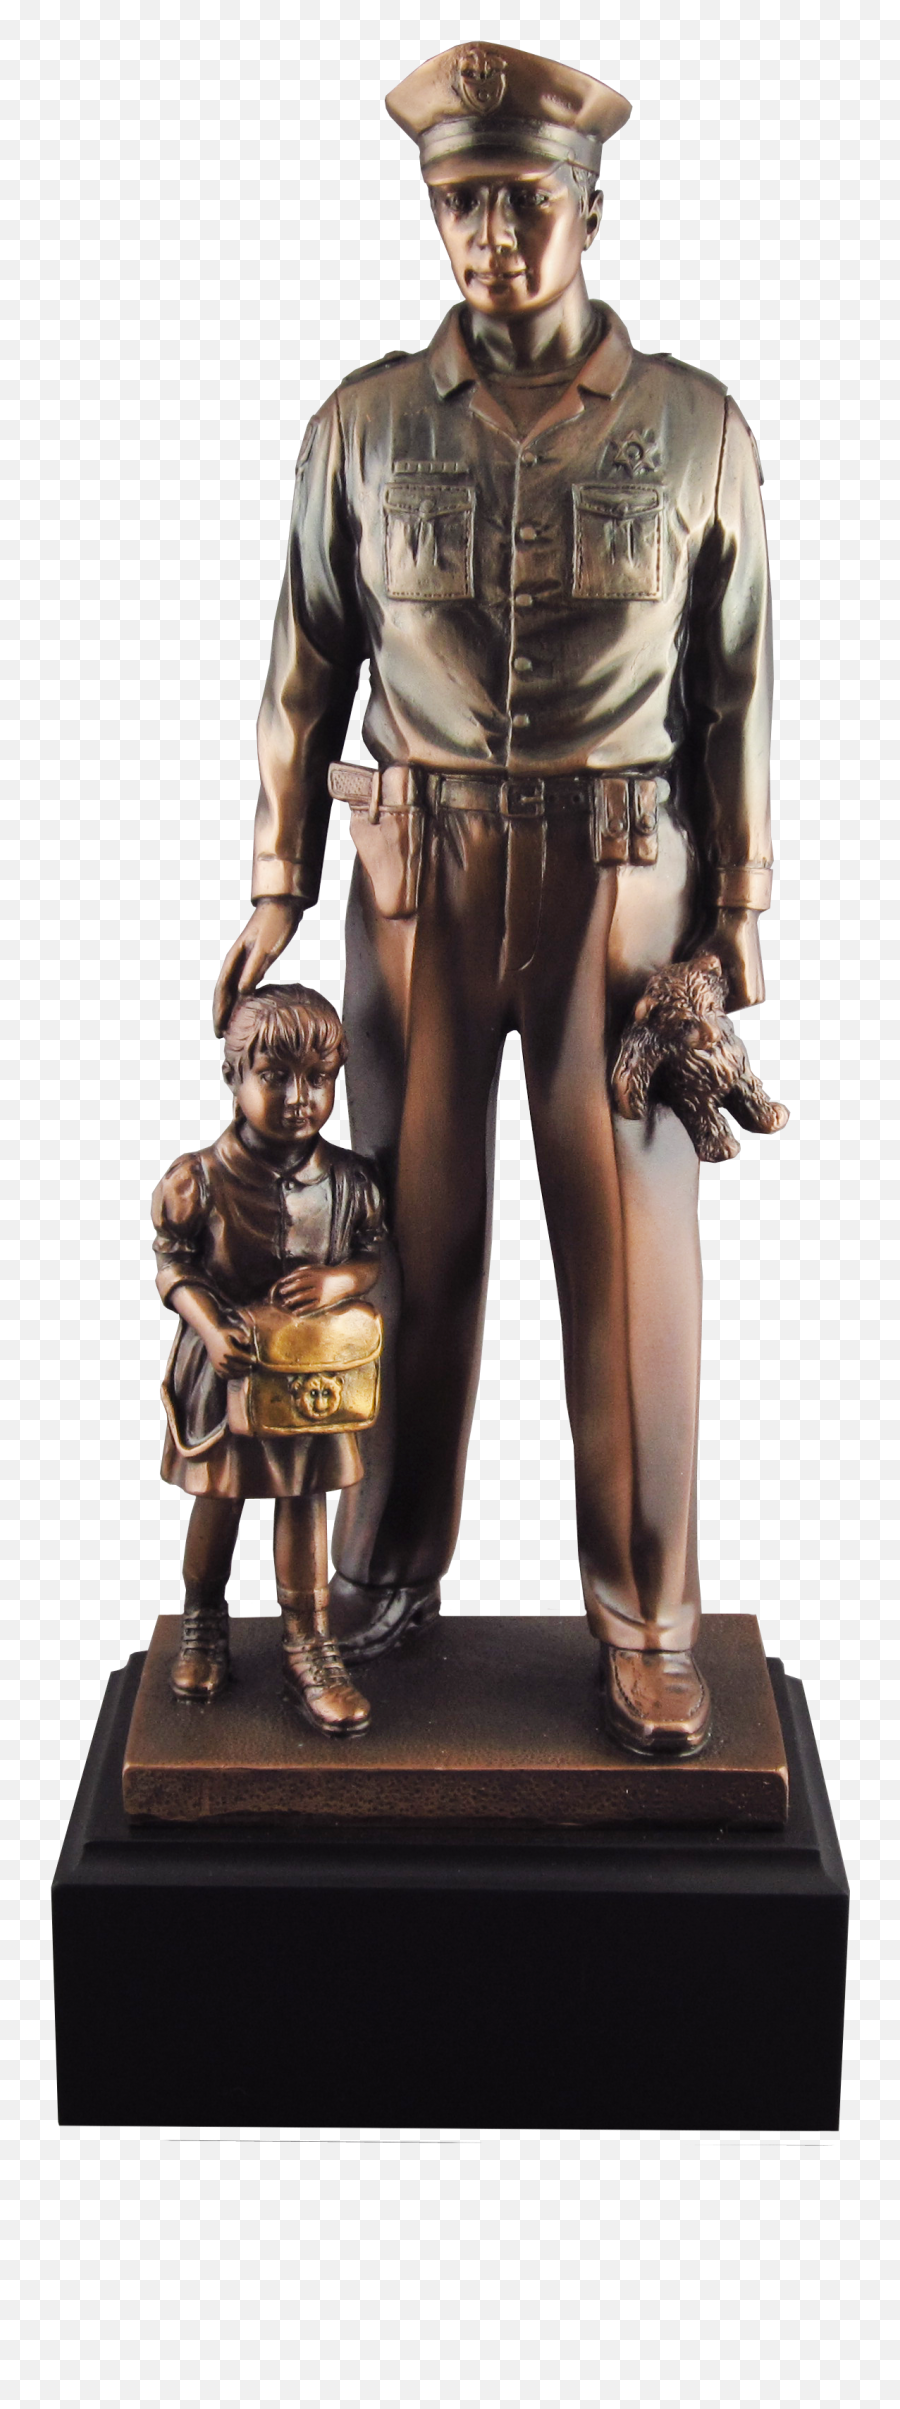 Police And Child Statue Hd Png - Policeman Statue,Policeman Png